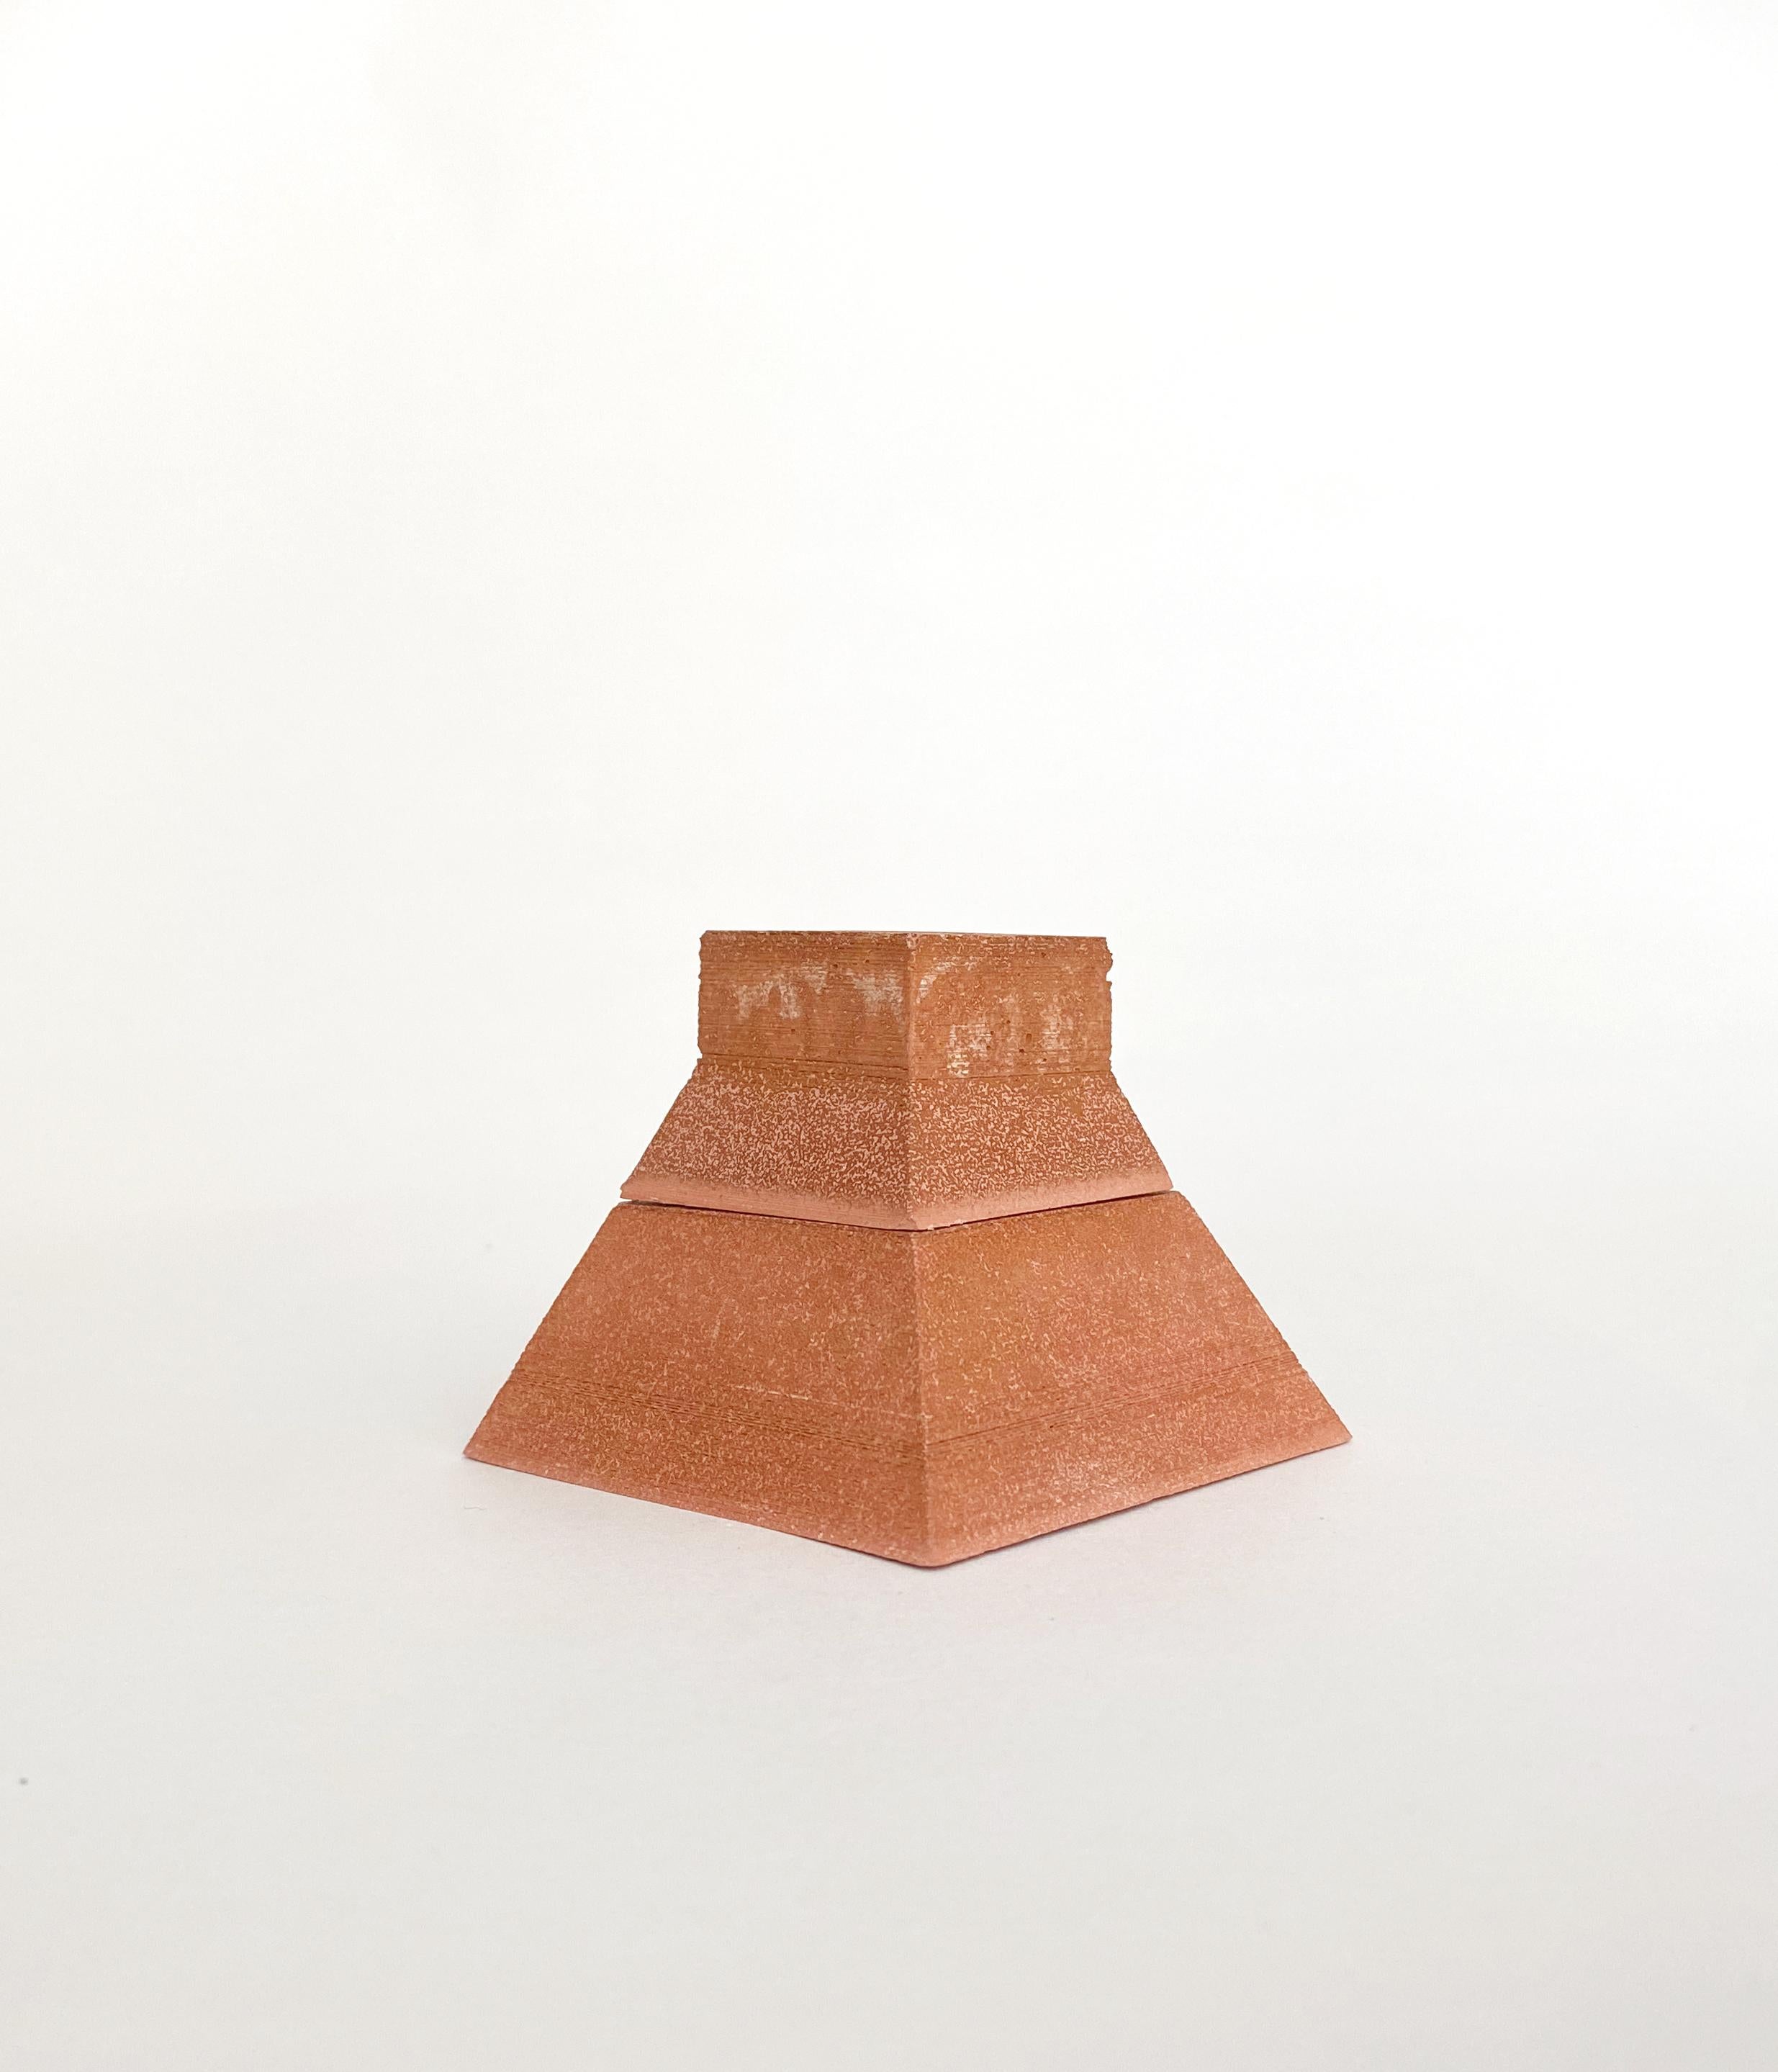 Nomad Jar Pyramide by Gilles & Cecilie
Unique
Dimensions: H 6 x W 7 cm
Material: terracotta with iron

Gilles and Cecilie Studio created the Nomad Jar Family to explore drawing in three dimensions. The series of objects that can stand alone or